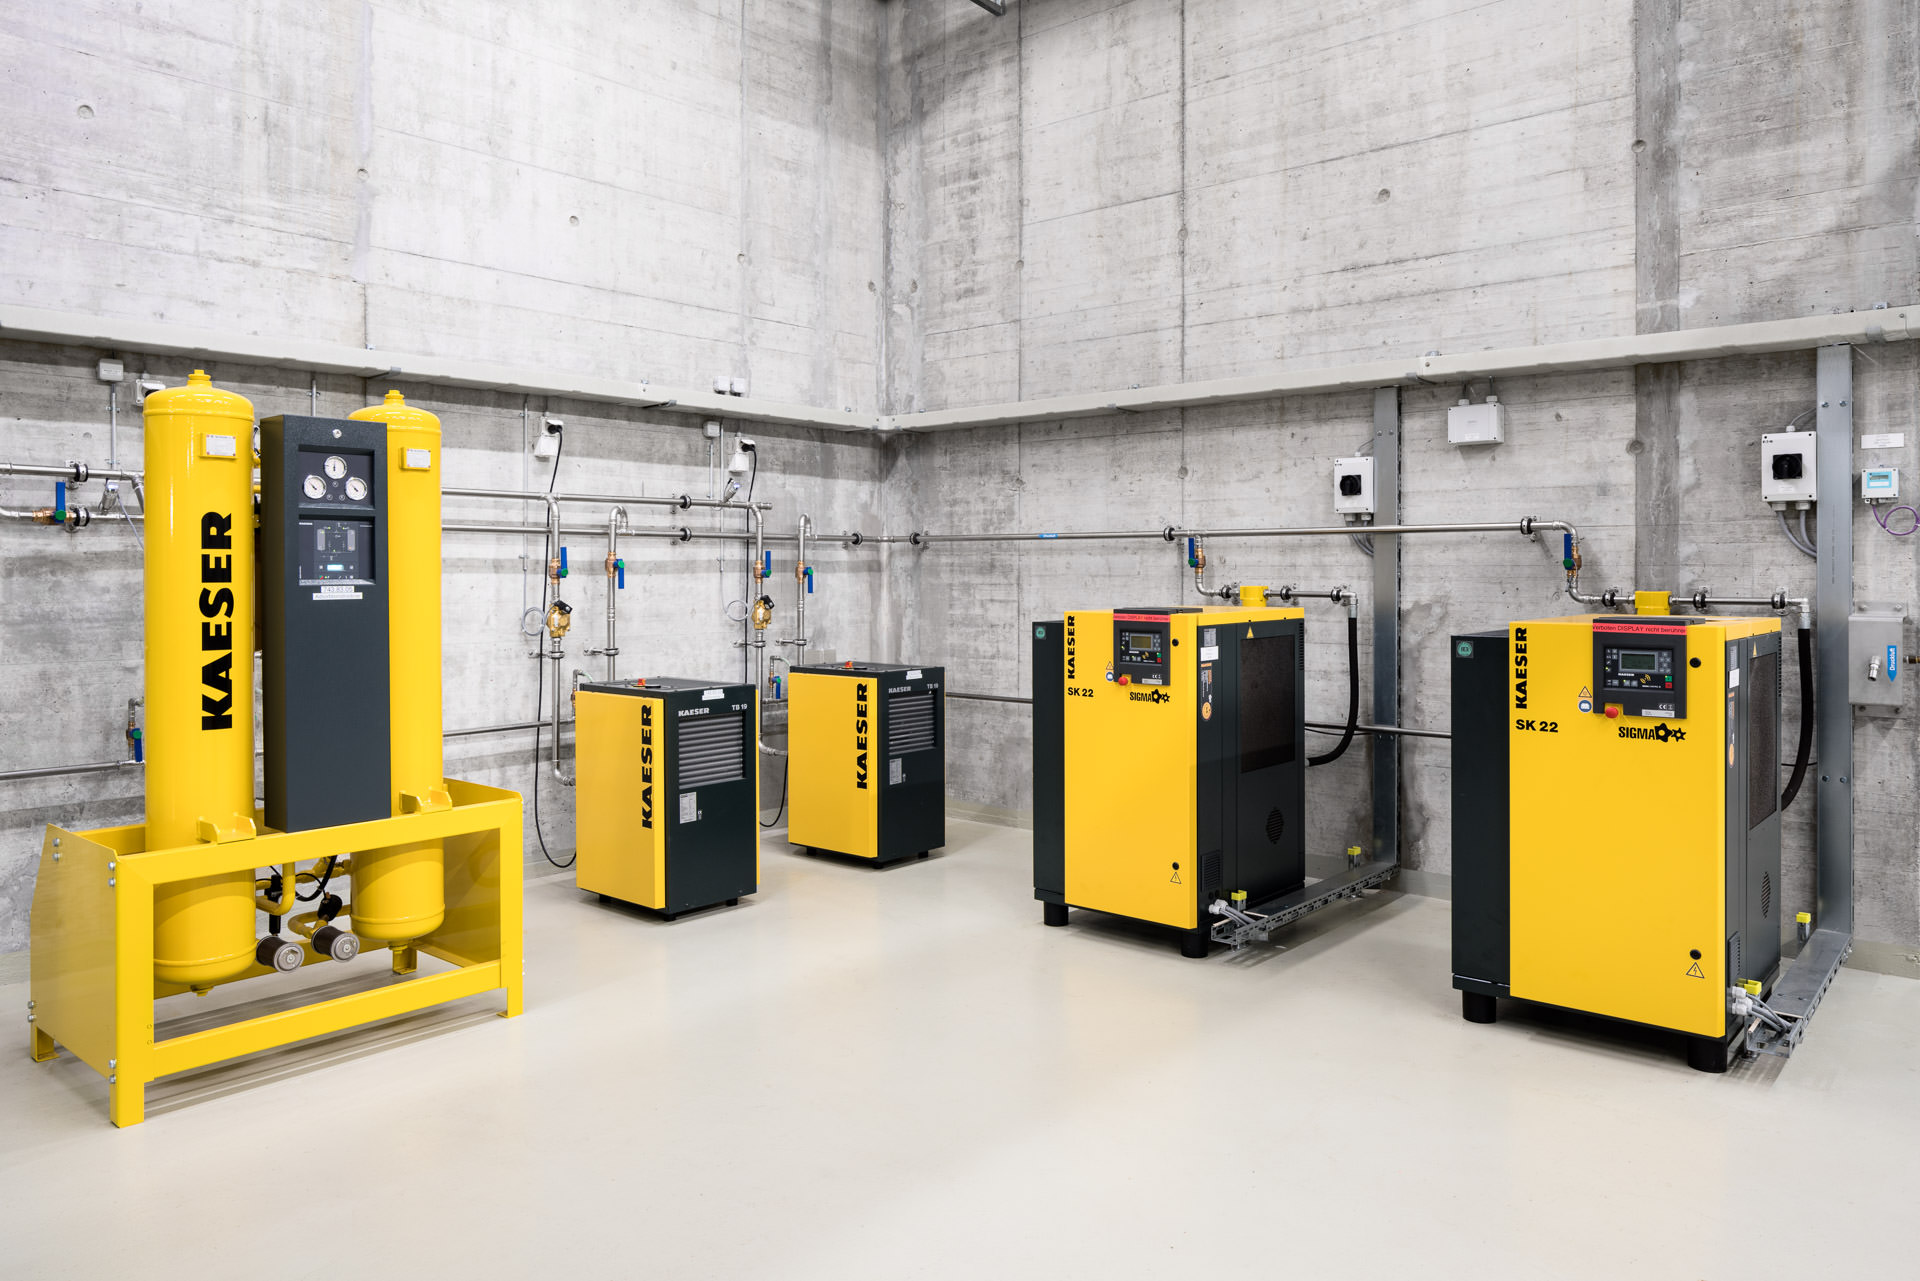 Reference product shot on location: Compressors in water cleaning plant Lucerne's underground installations